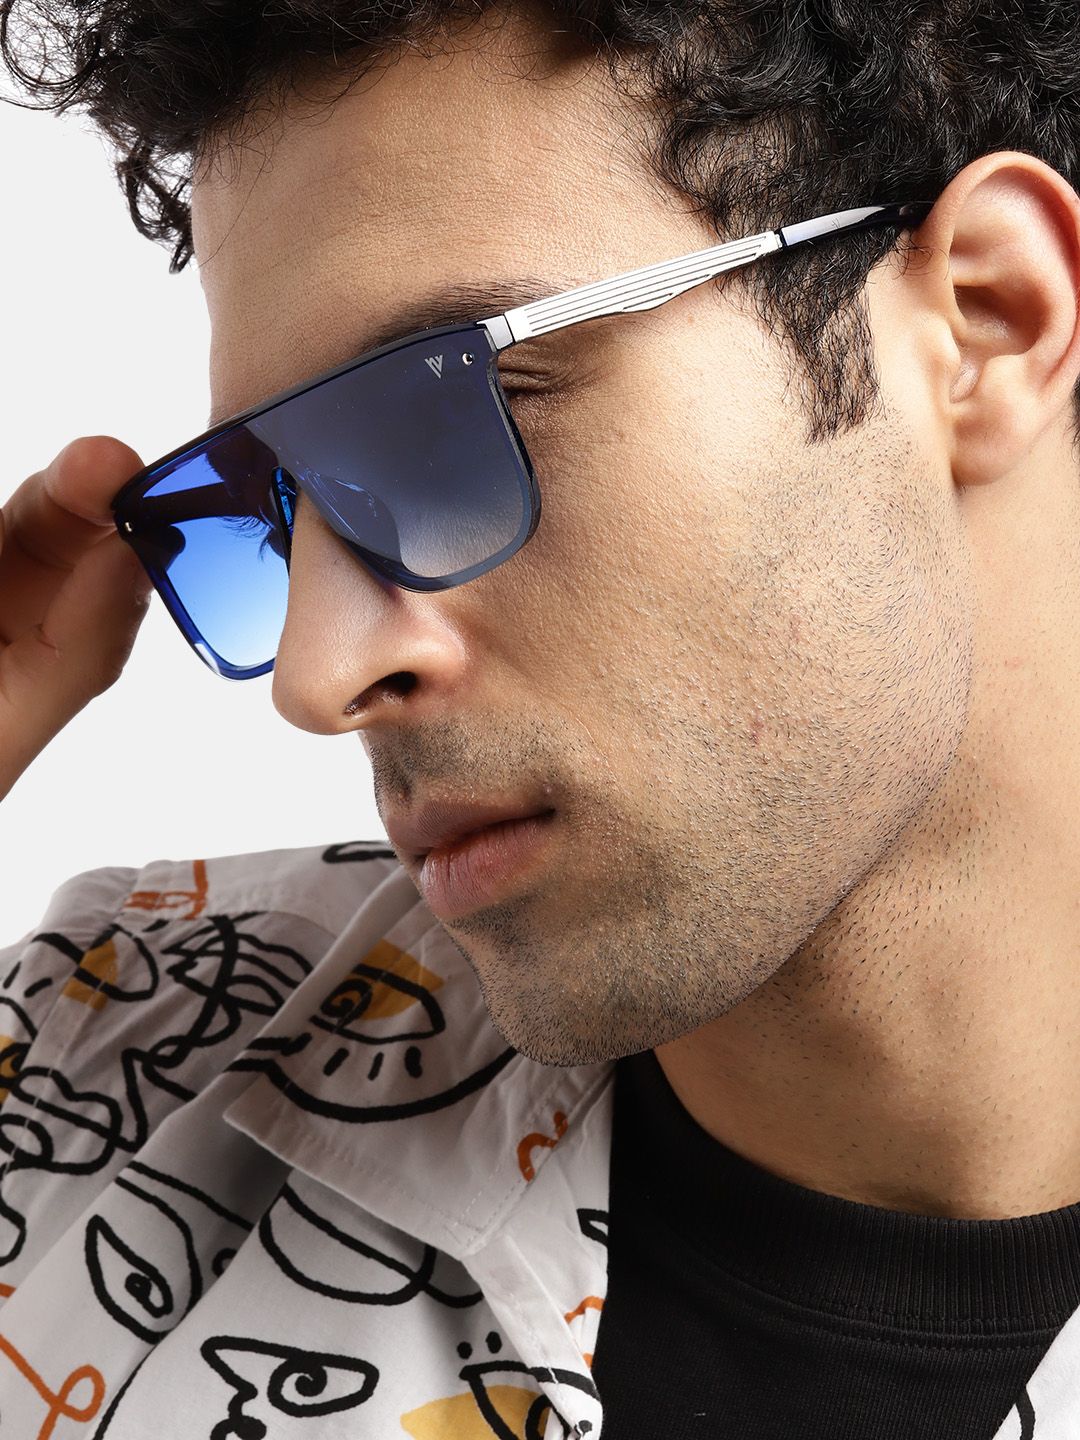 Voyage Unisex Blue Lens Rectangle Sunglasses with UV Protected Lens 1810-6071MG3331C Price in India